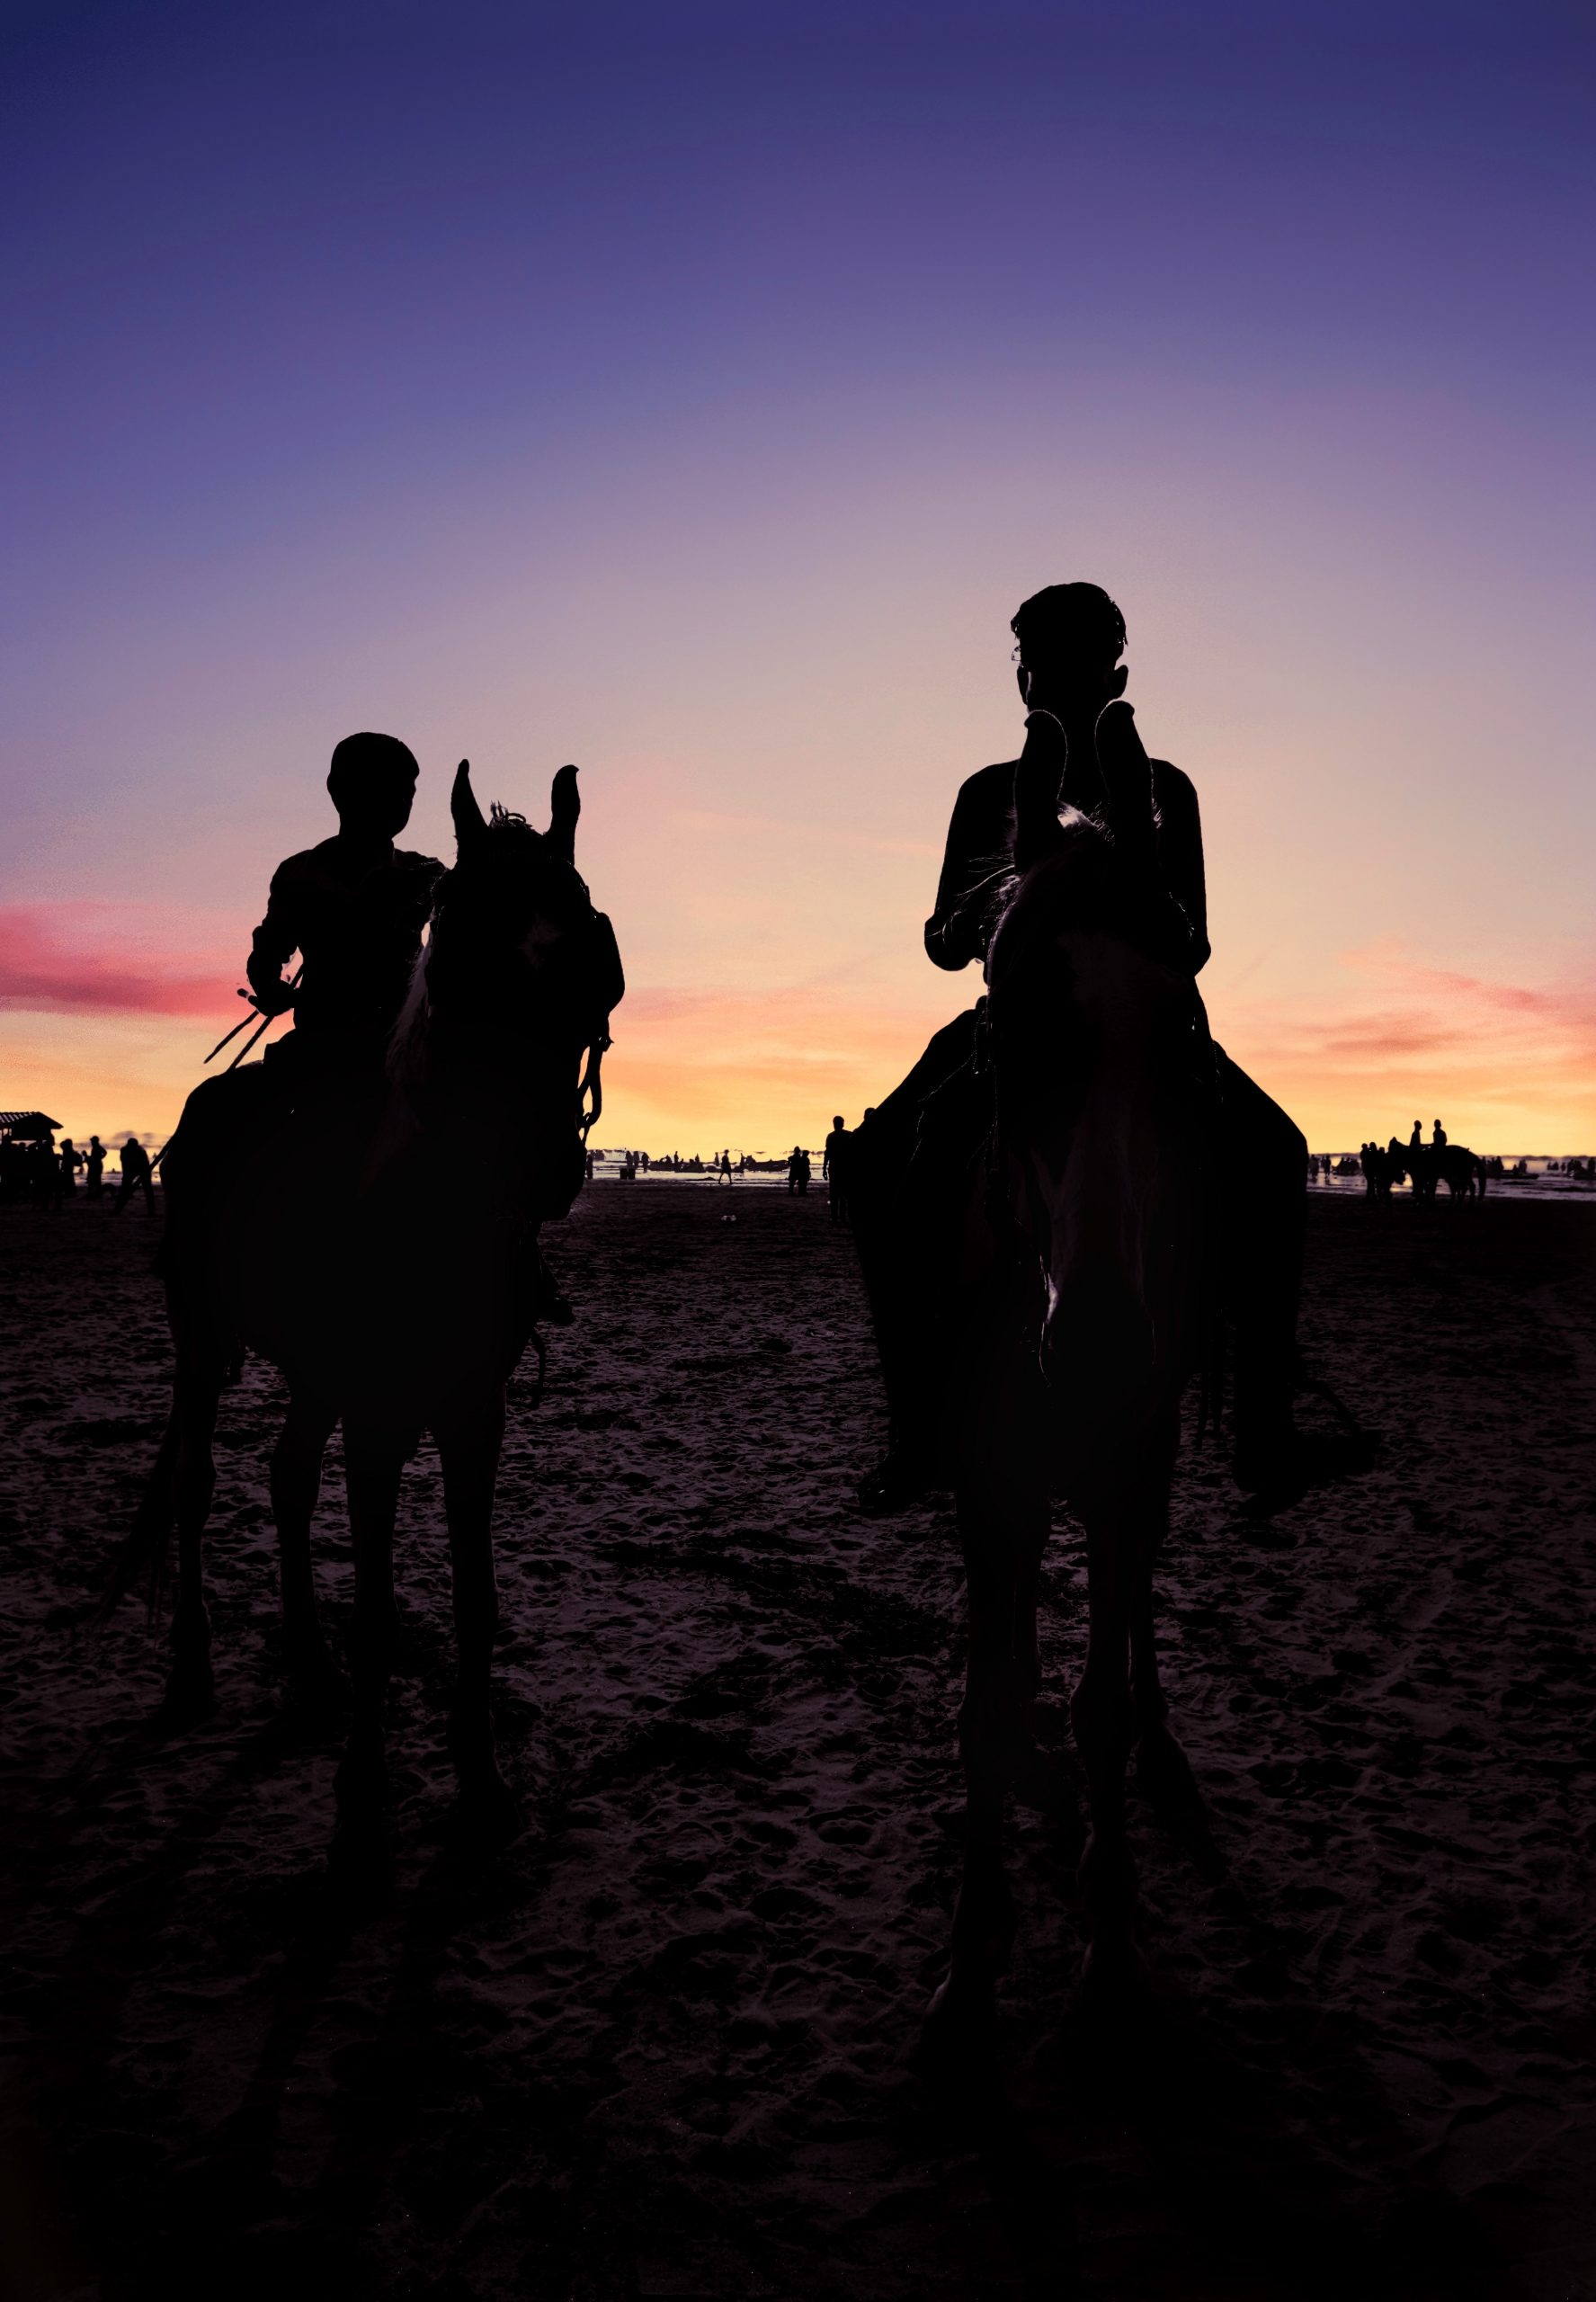 Silhouette of horse riders